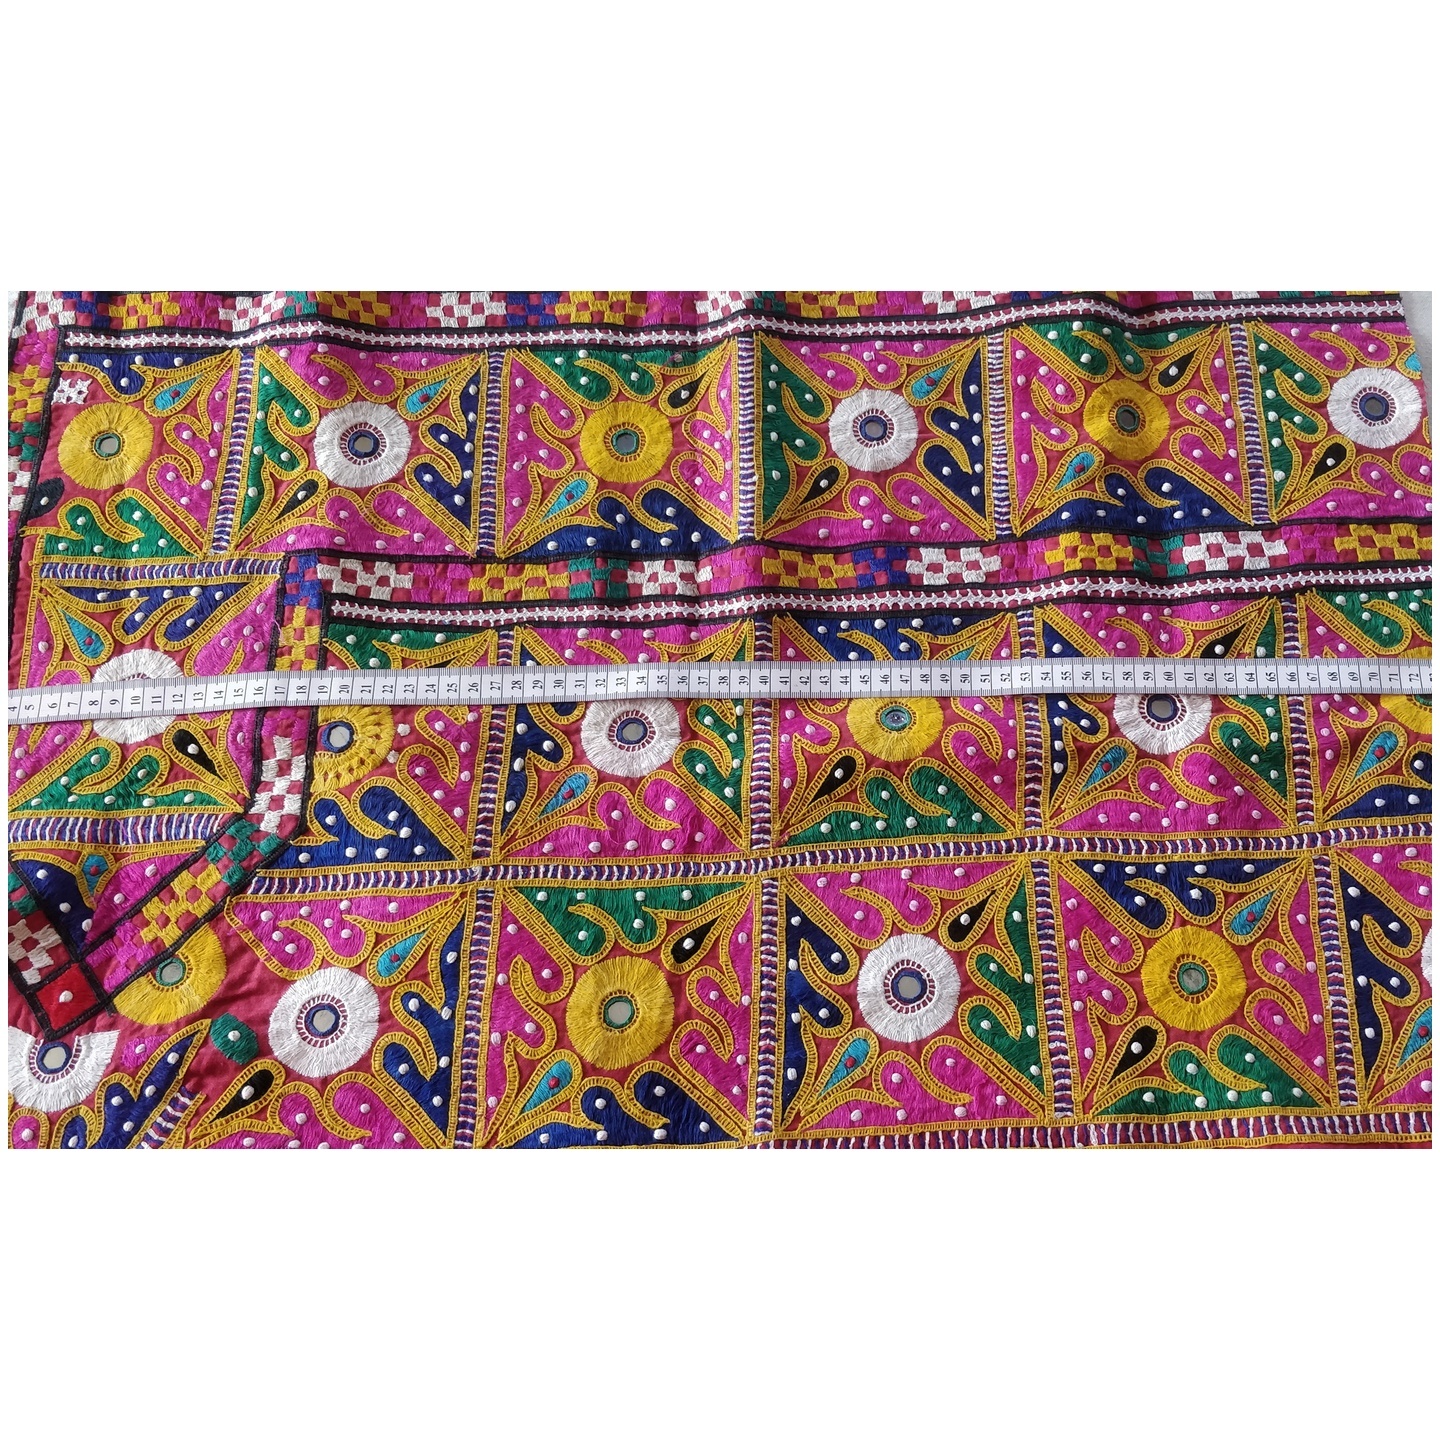 DKW04 - Kutch work hand embroidered Fabric